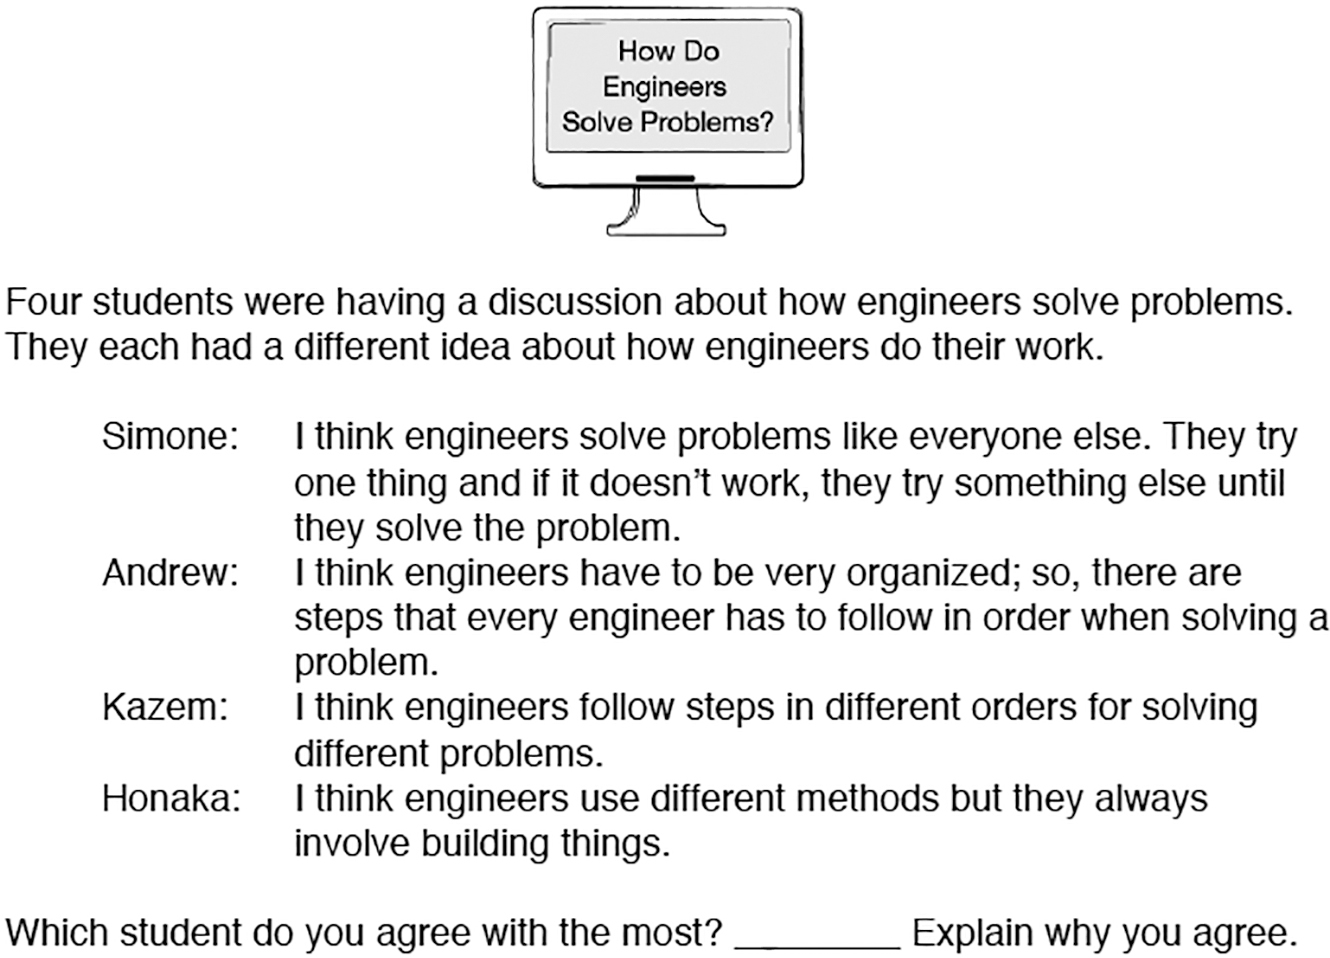 How Do Engineers Solve Problems? probe.